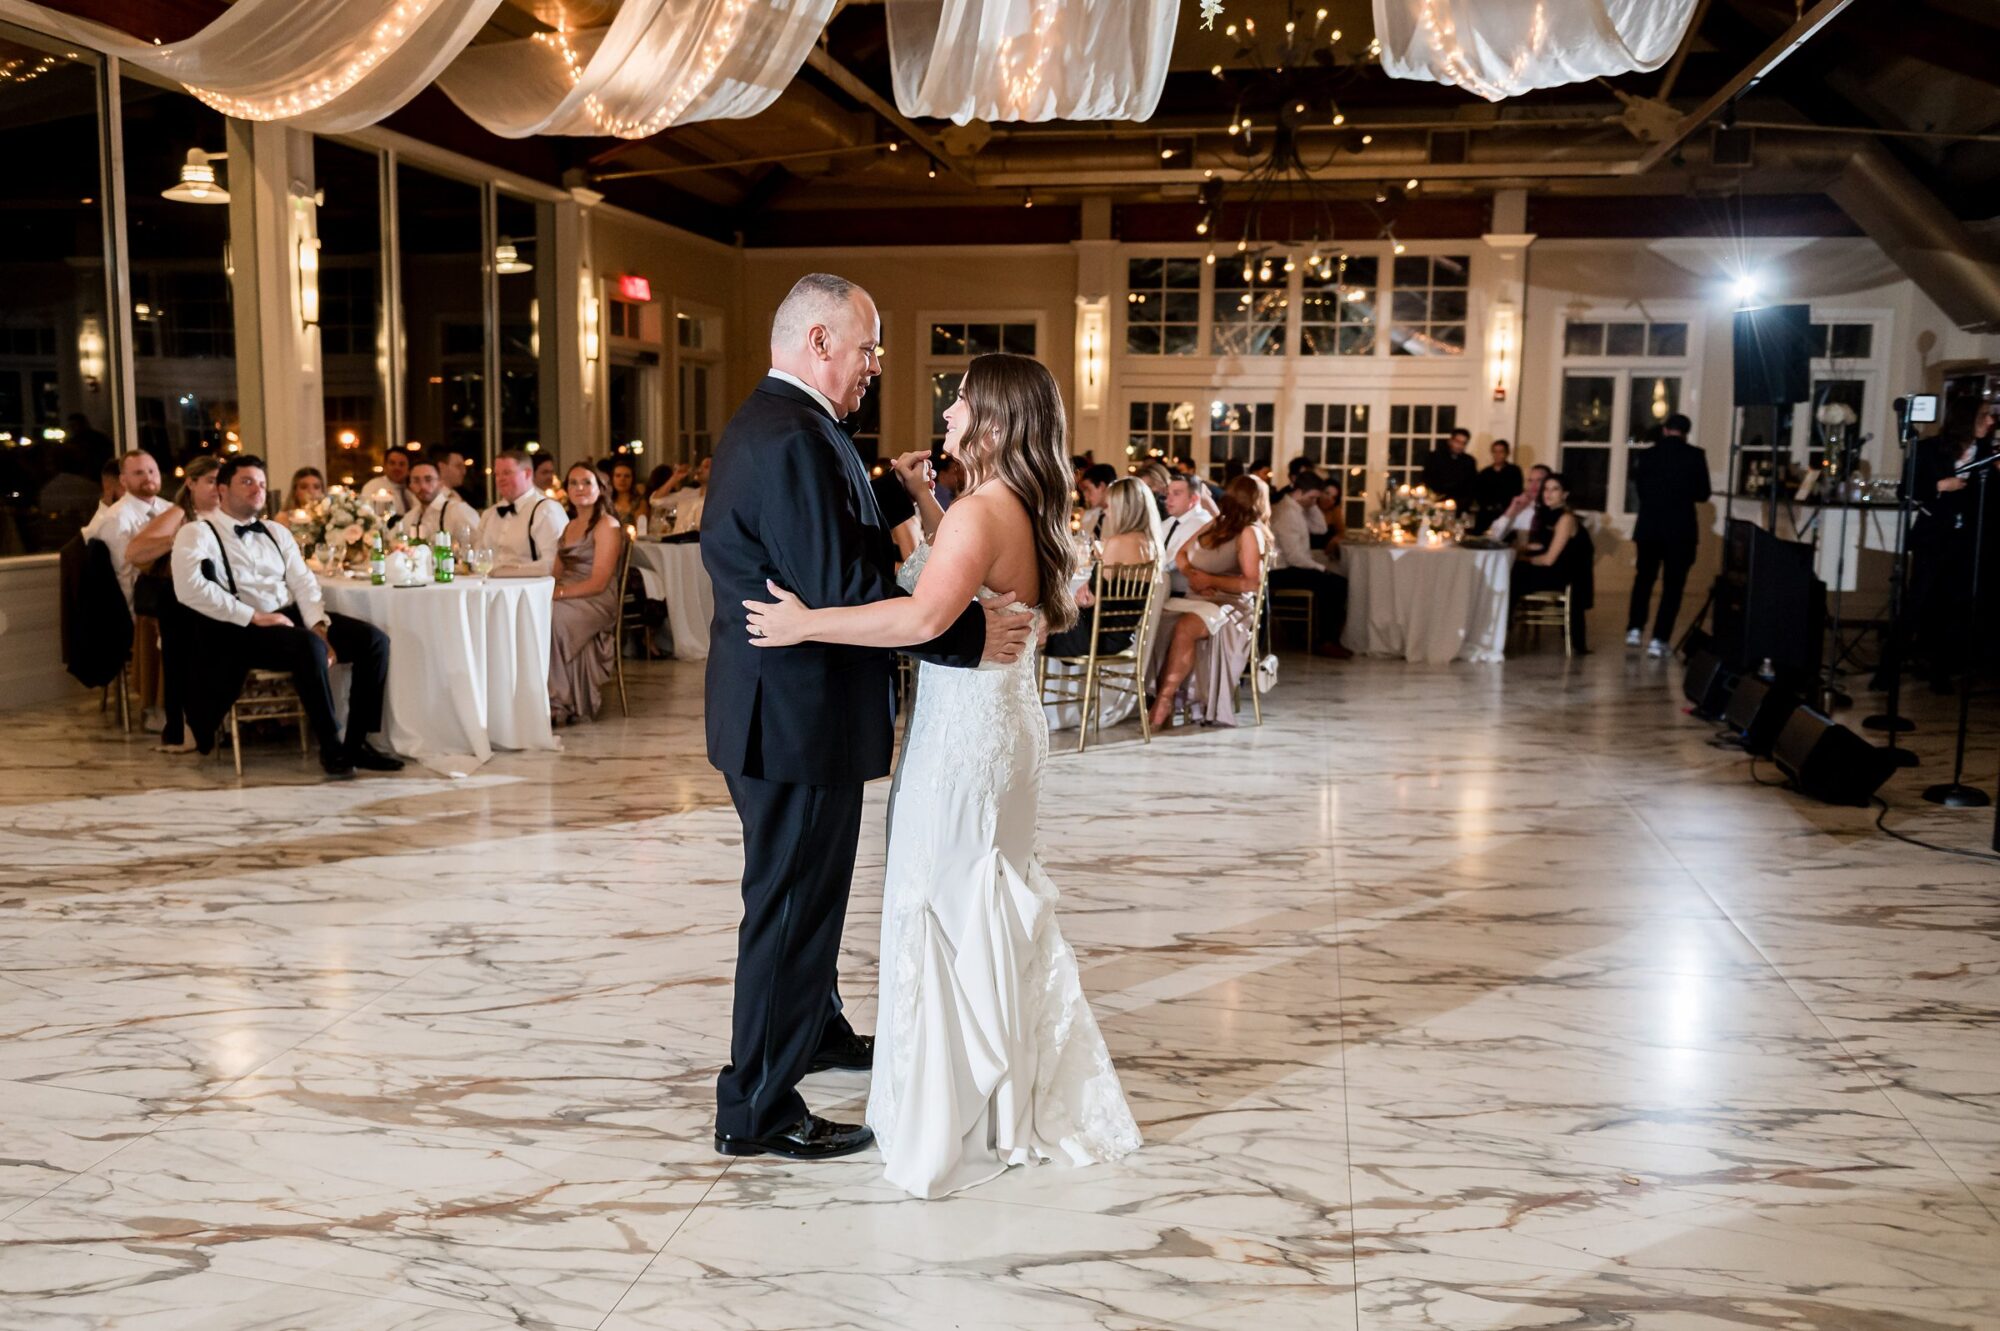 A bride and groom sharing their first dance at their wedding reception.